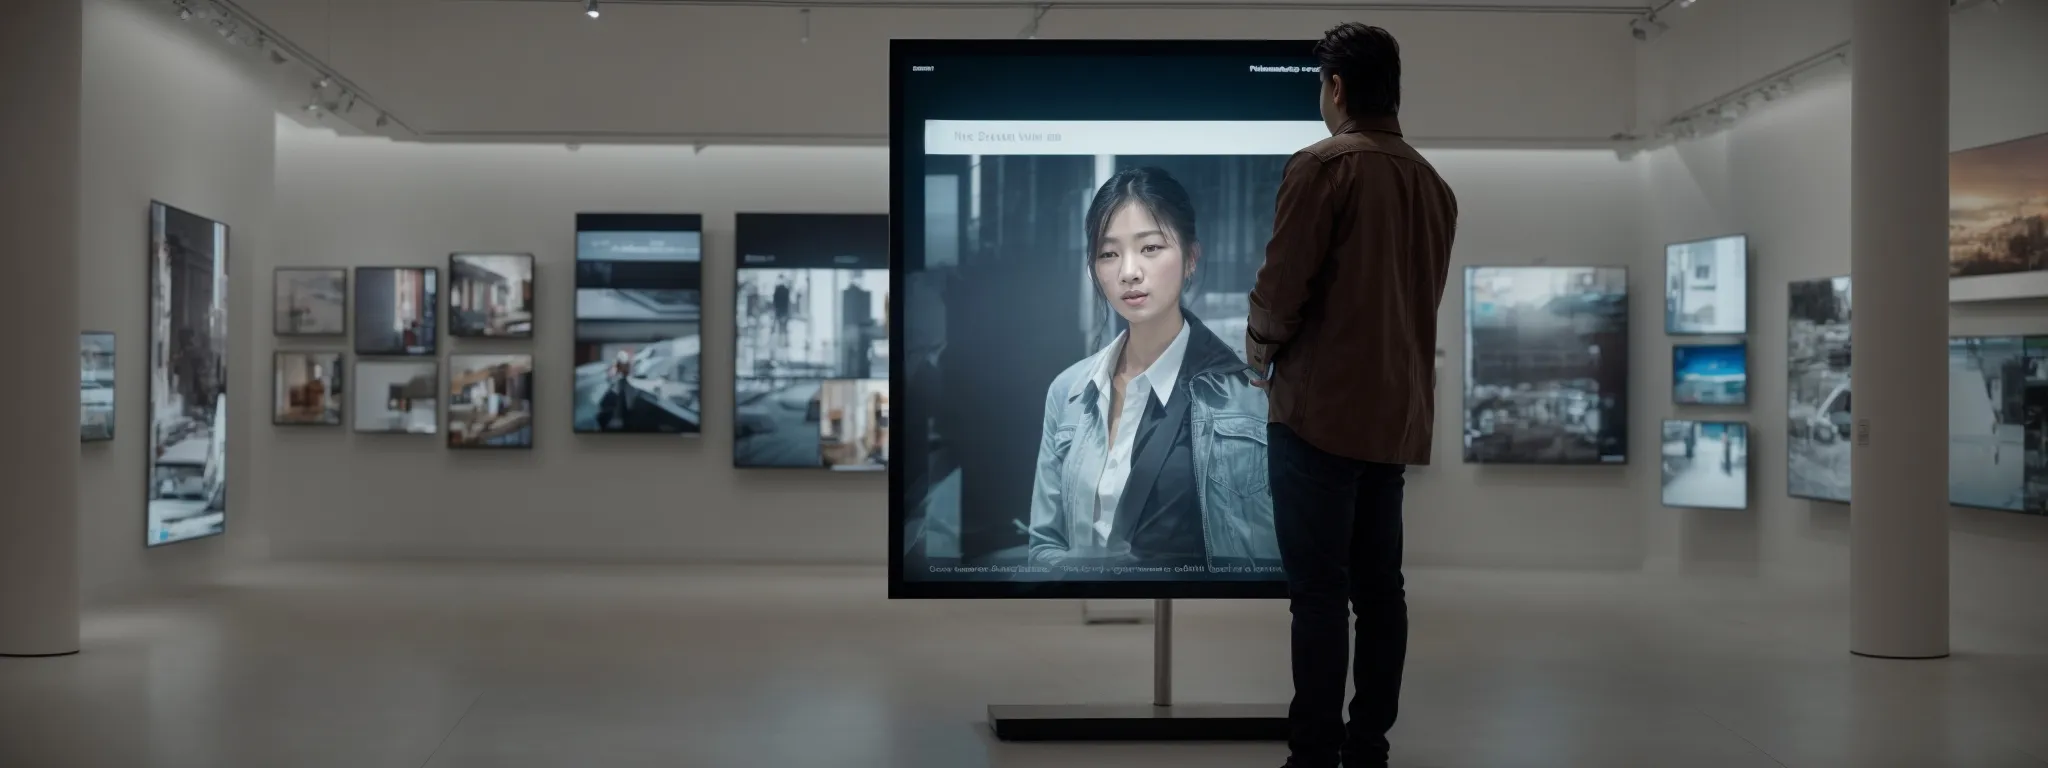 an artist standing before a large, interactive touch screen, fluidly swiping through a sleek, image-rich website gallery.